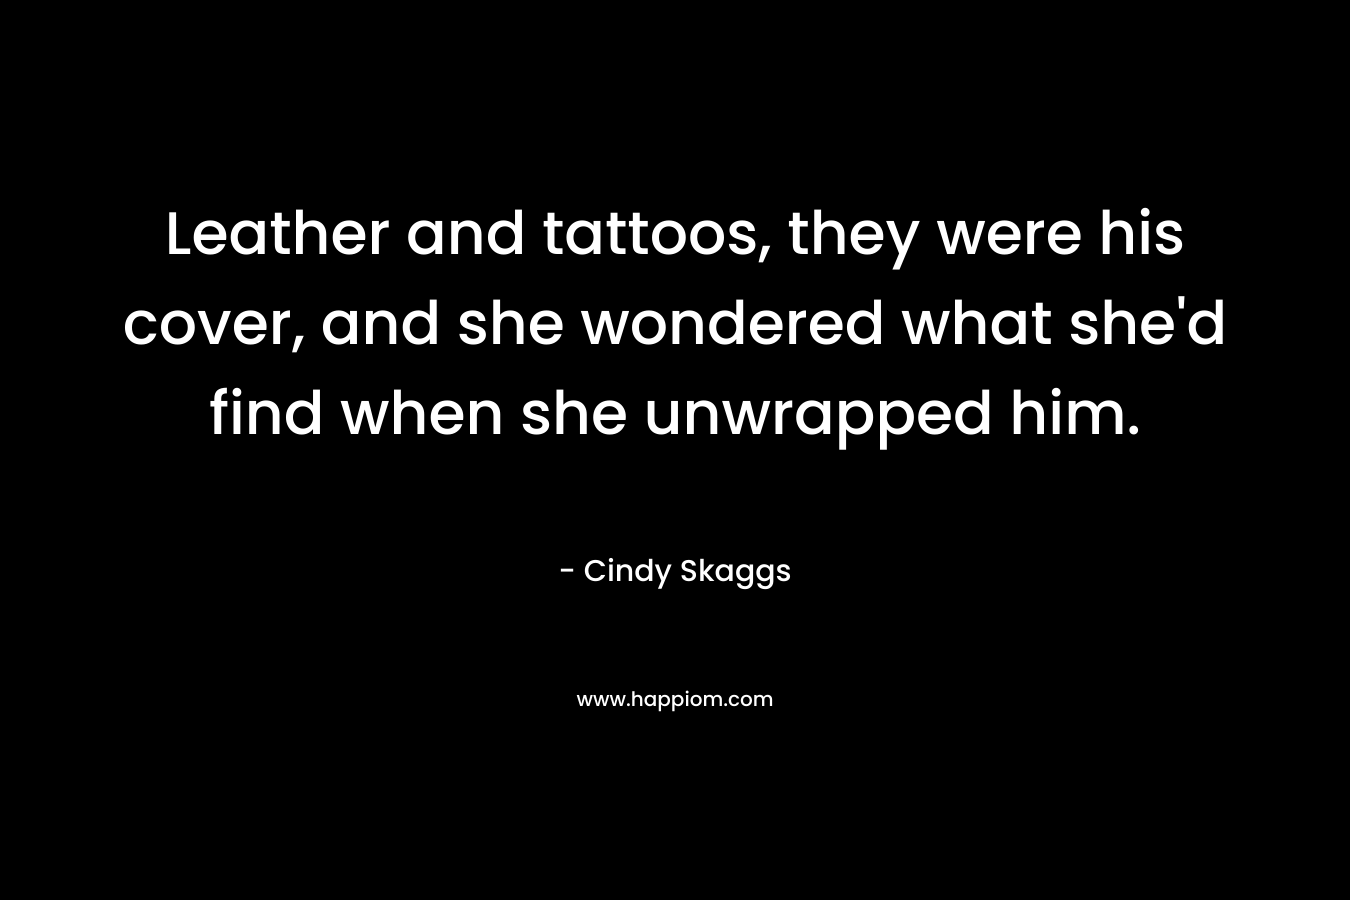 Leather and tattoos, they were his cover, and she wondered what she’d find when she unwrapped him. – Cindy Skaggs